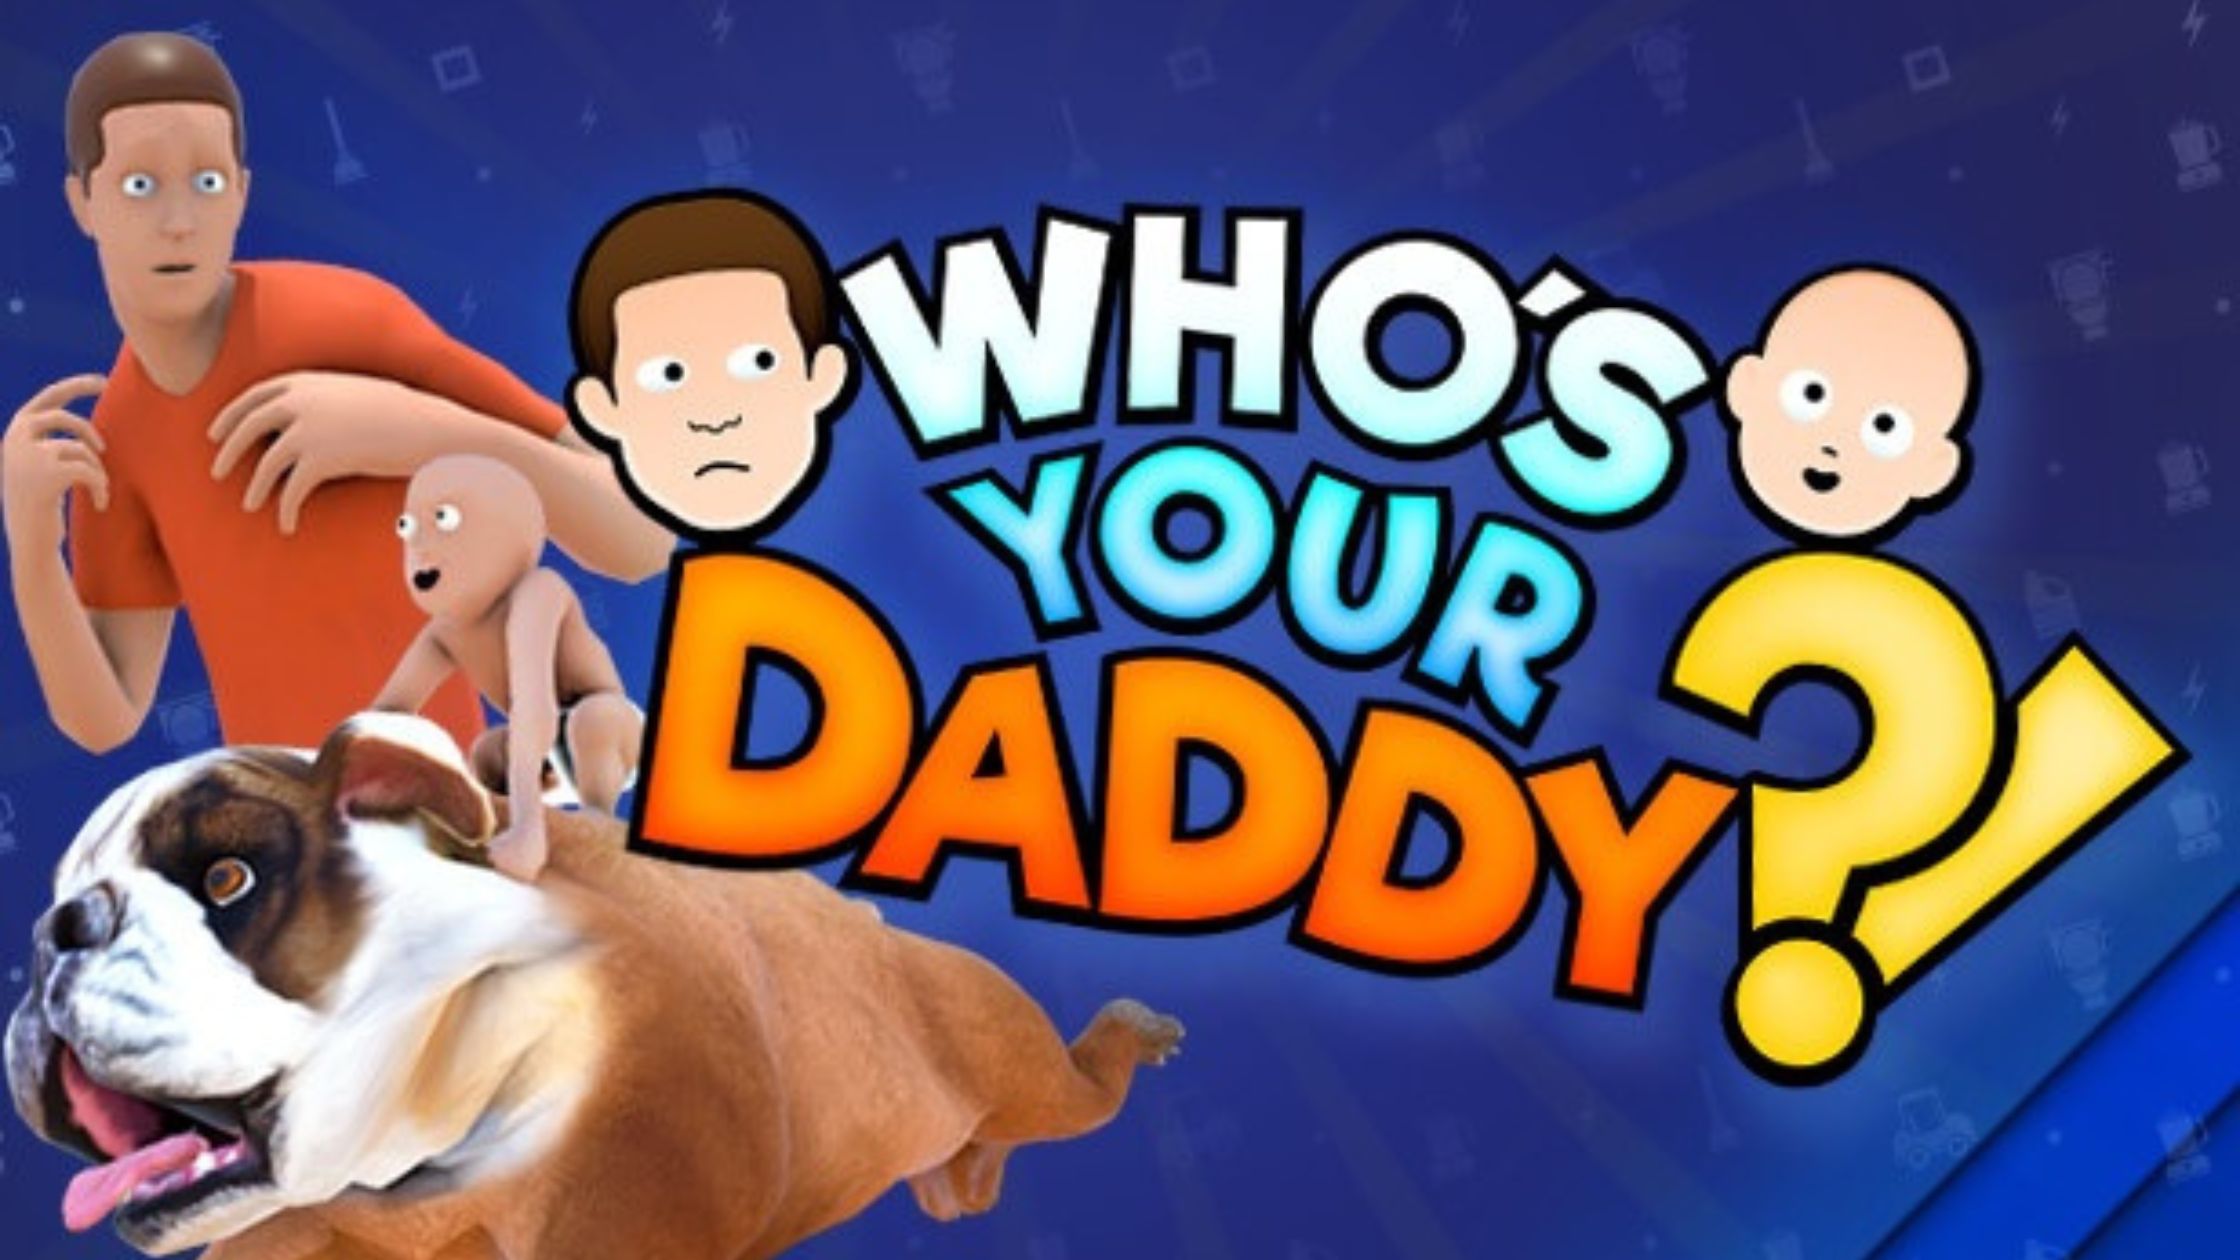 Who's Your Daddy?! Image Source: store.steampowered